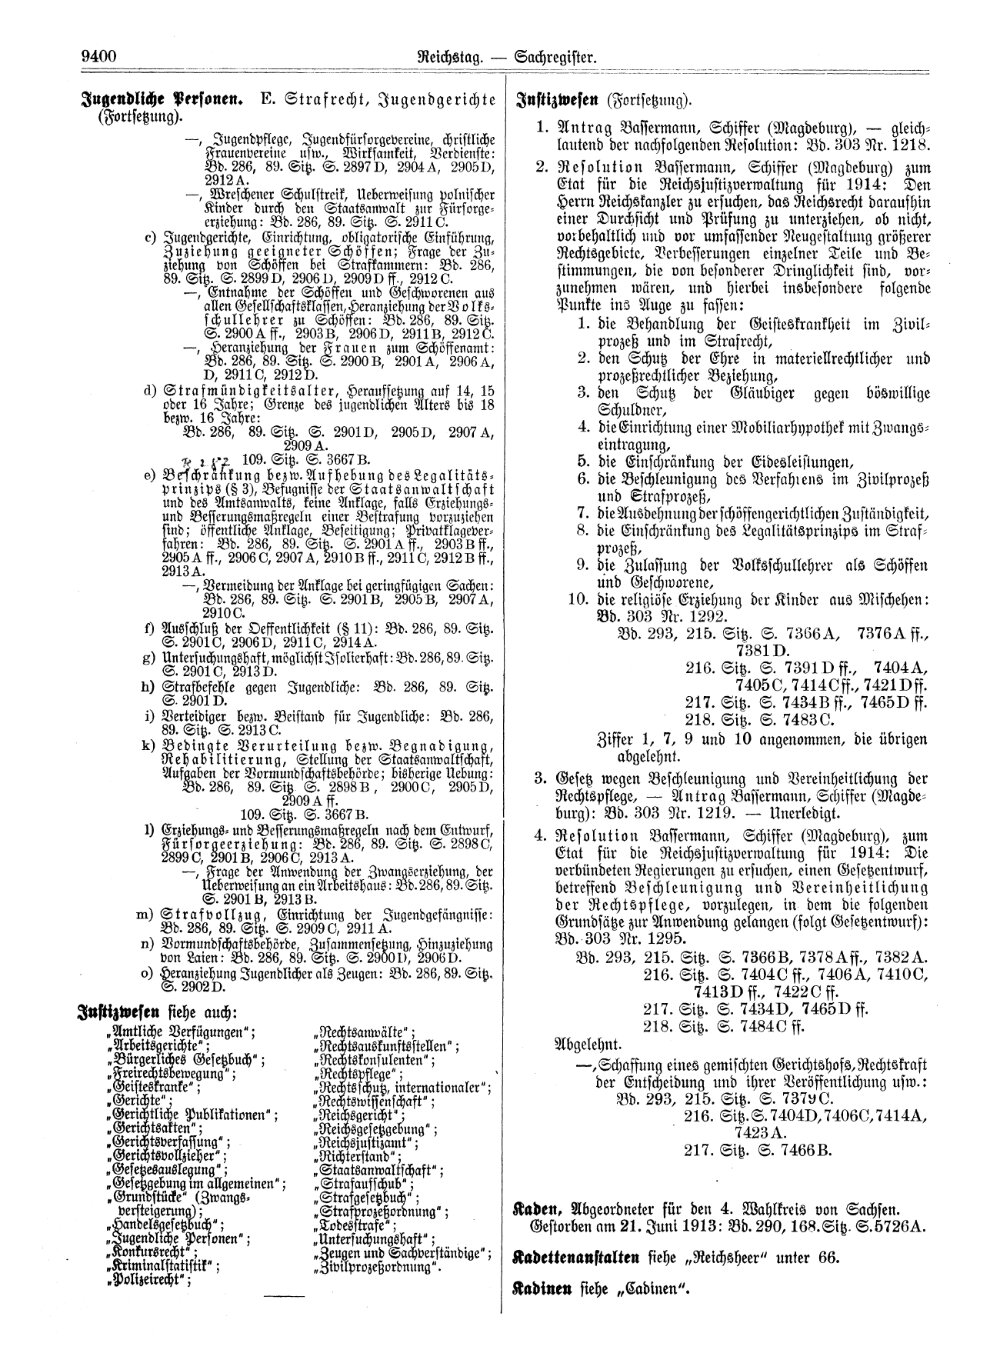 Scan of page 9400